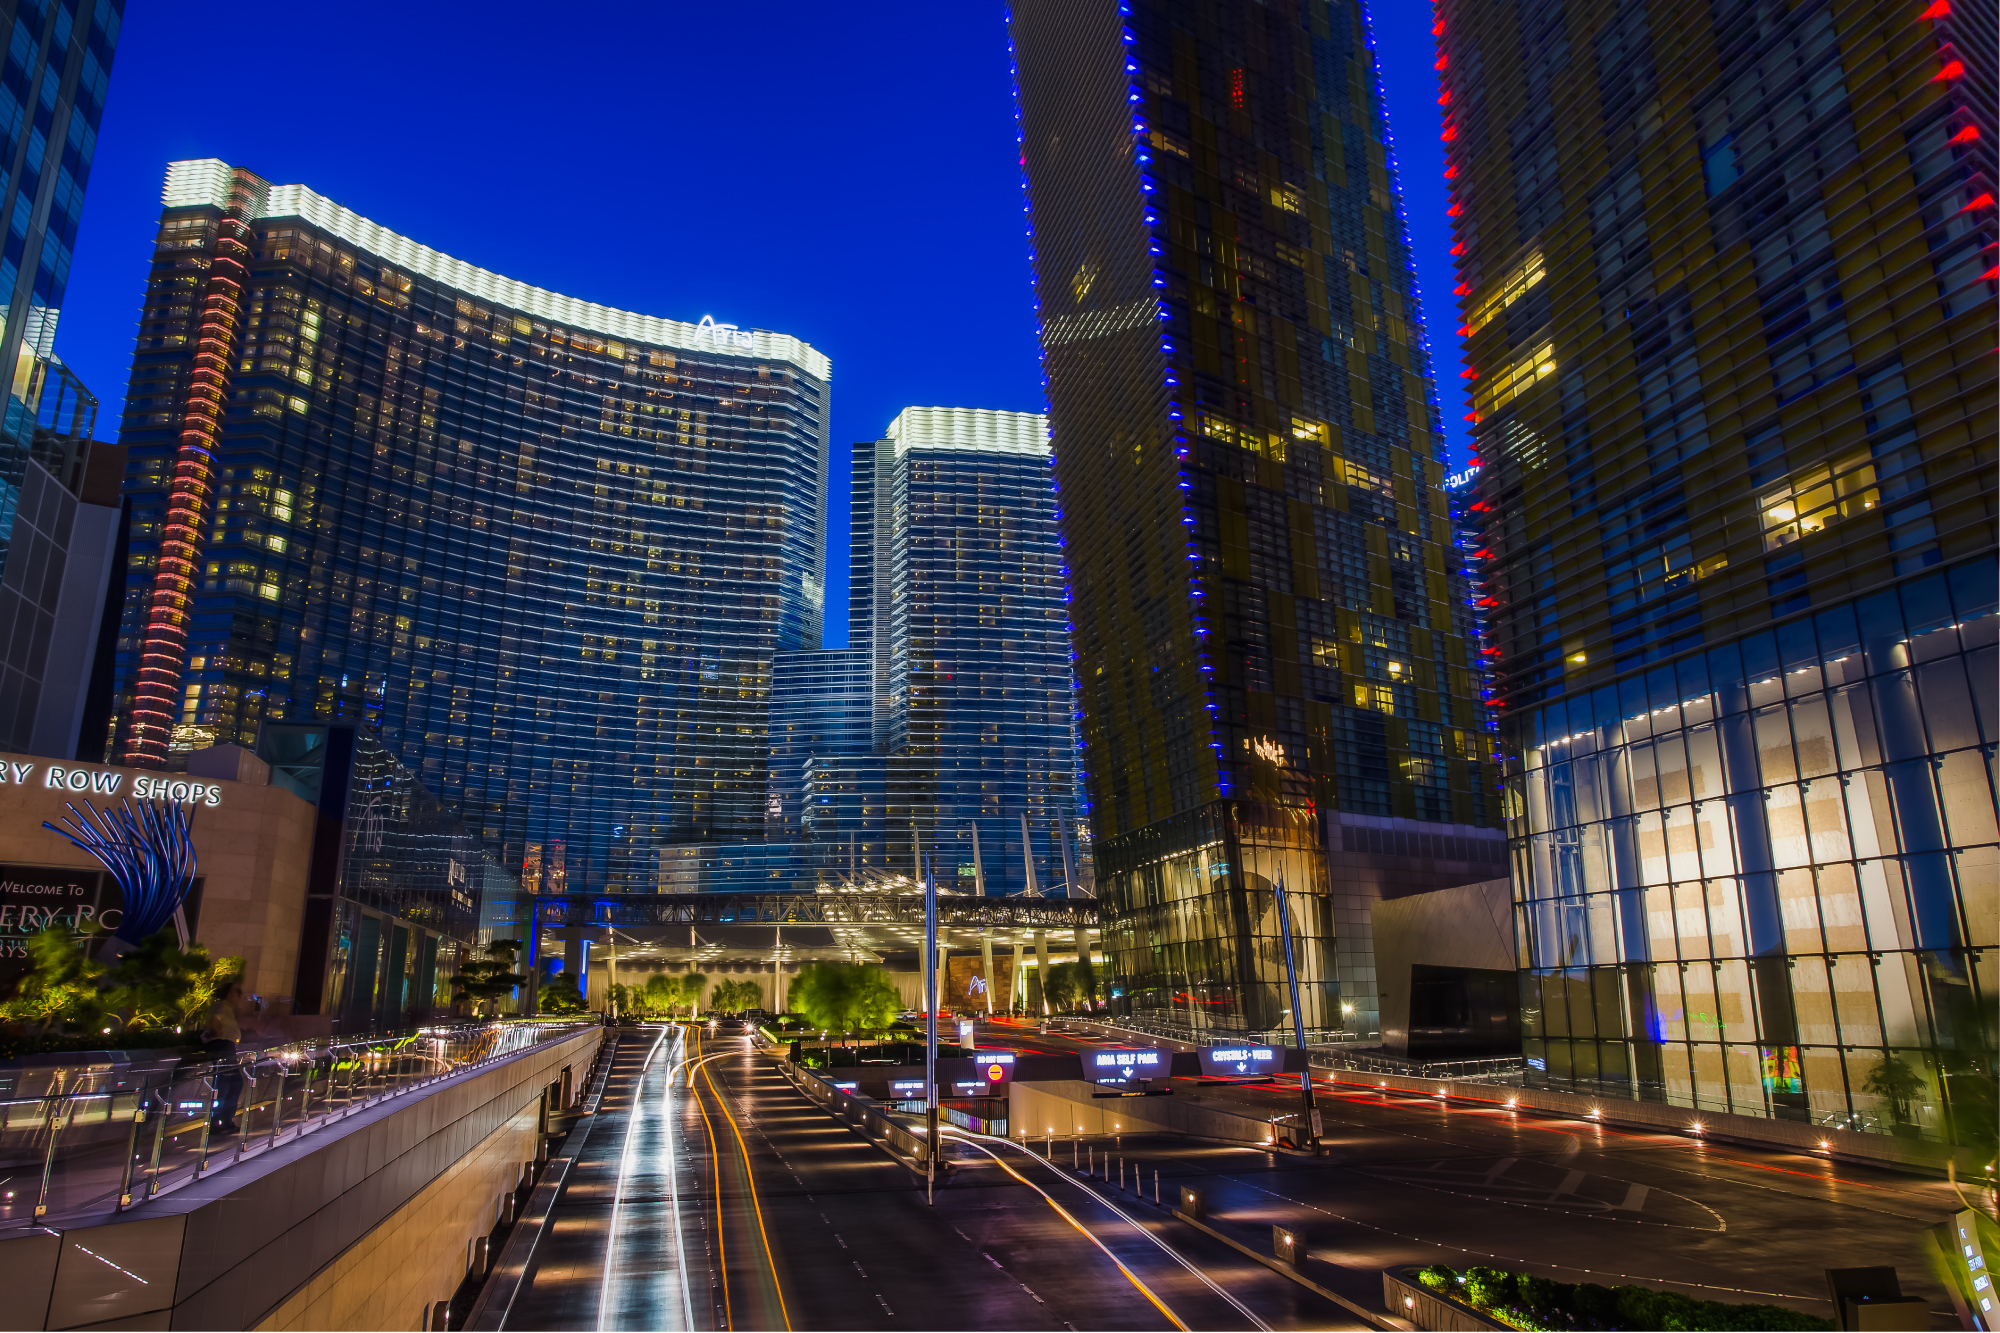 HDR Photography Workshop: Las Vegas and Los Angeles HDR Introduction